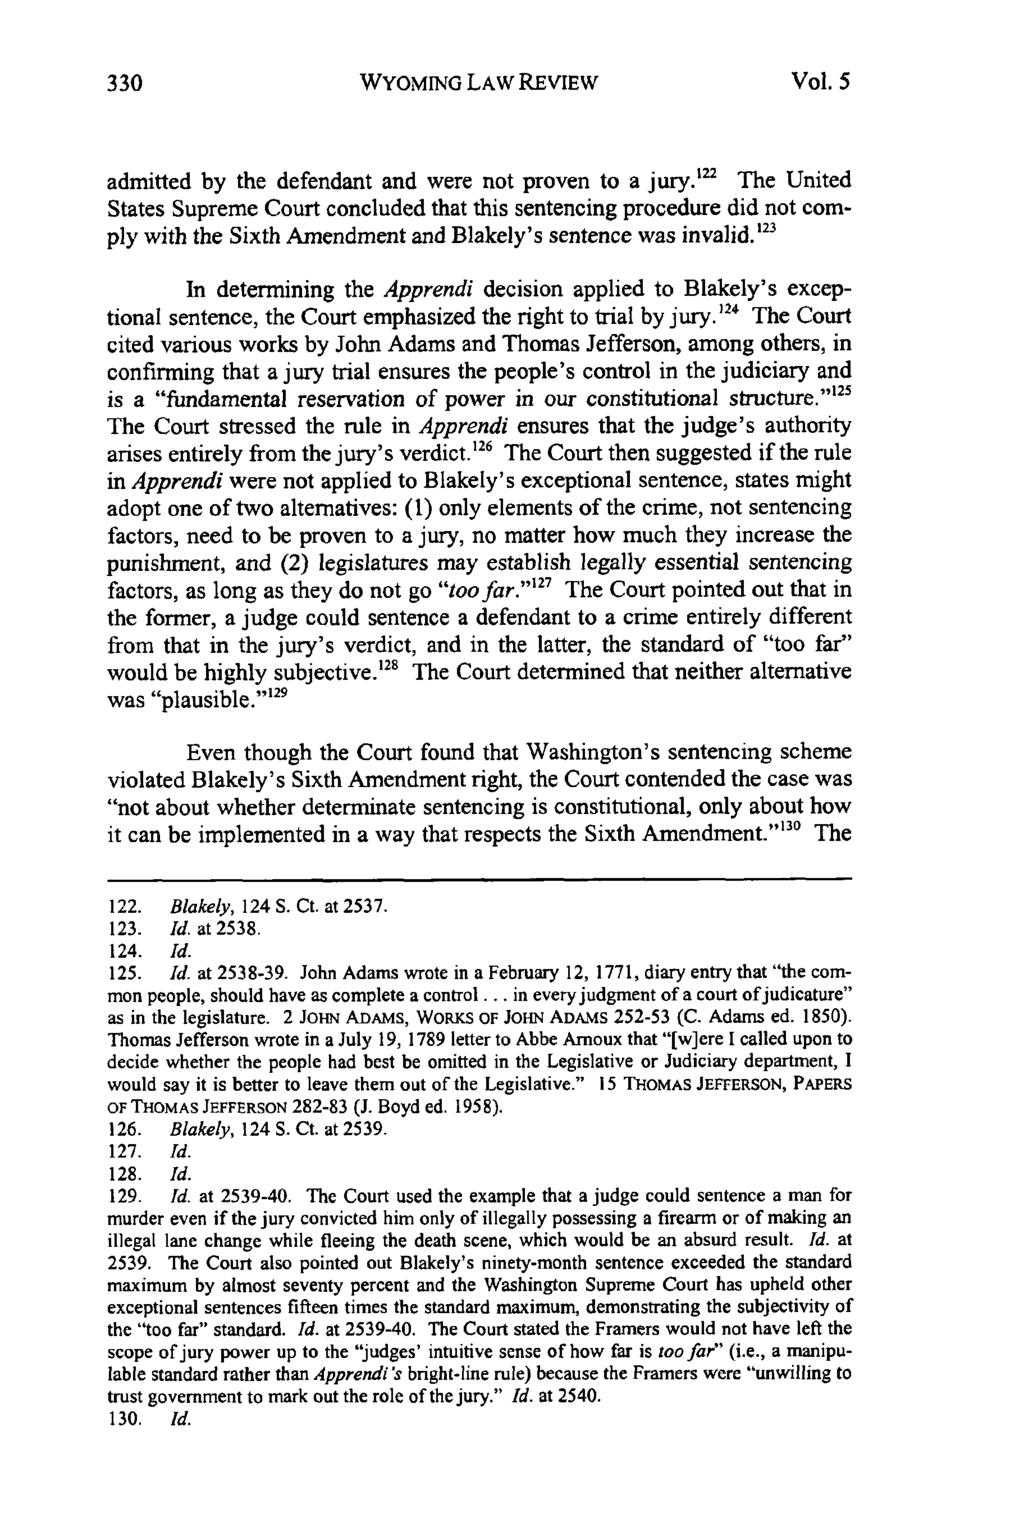 WYOMING LAW REVIEW Vol. 5 admitted by the defendant and were not proven to a jury.